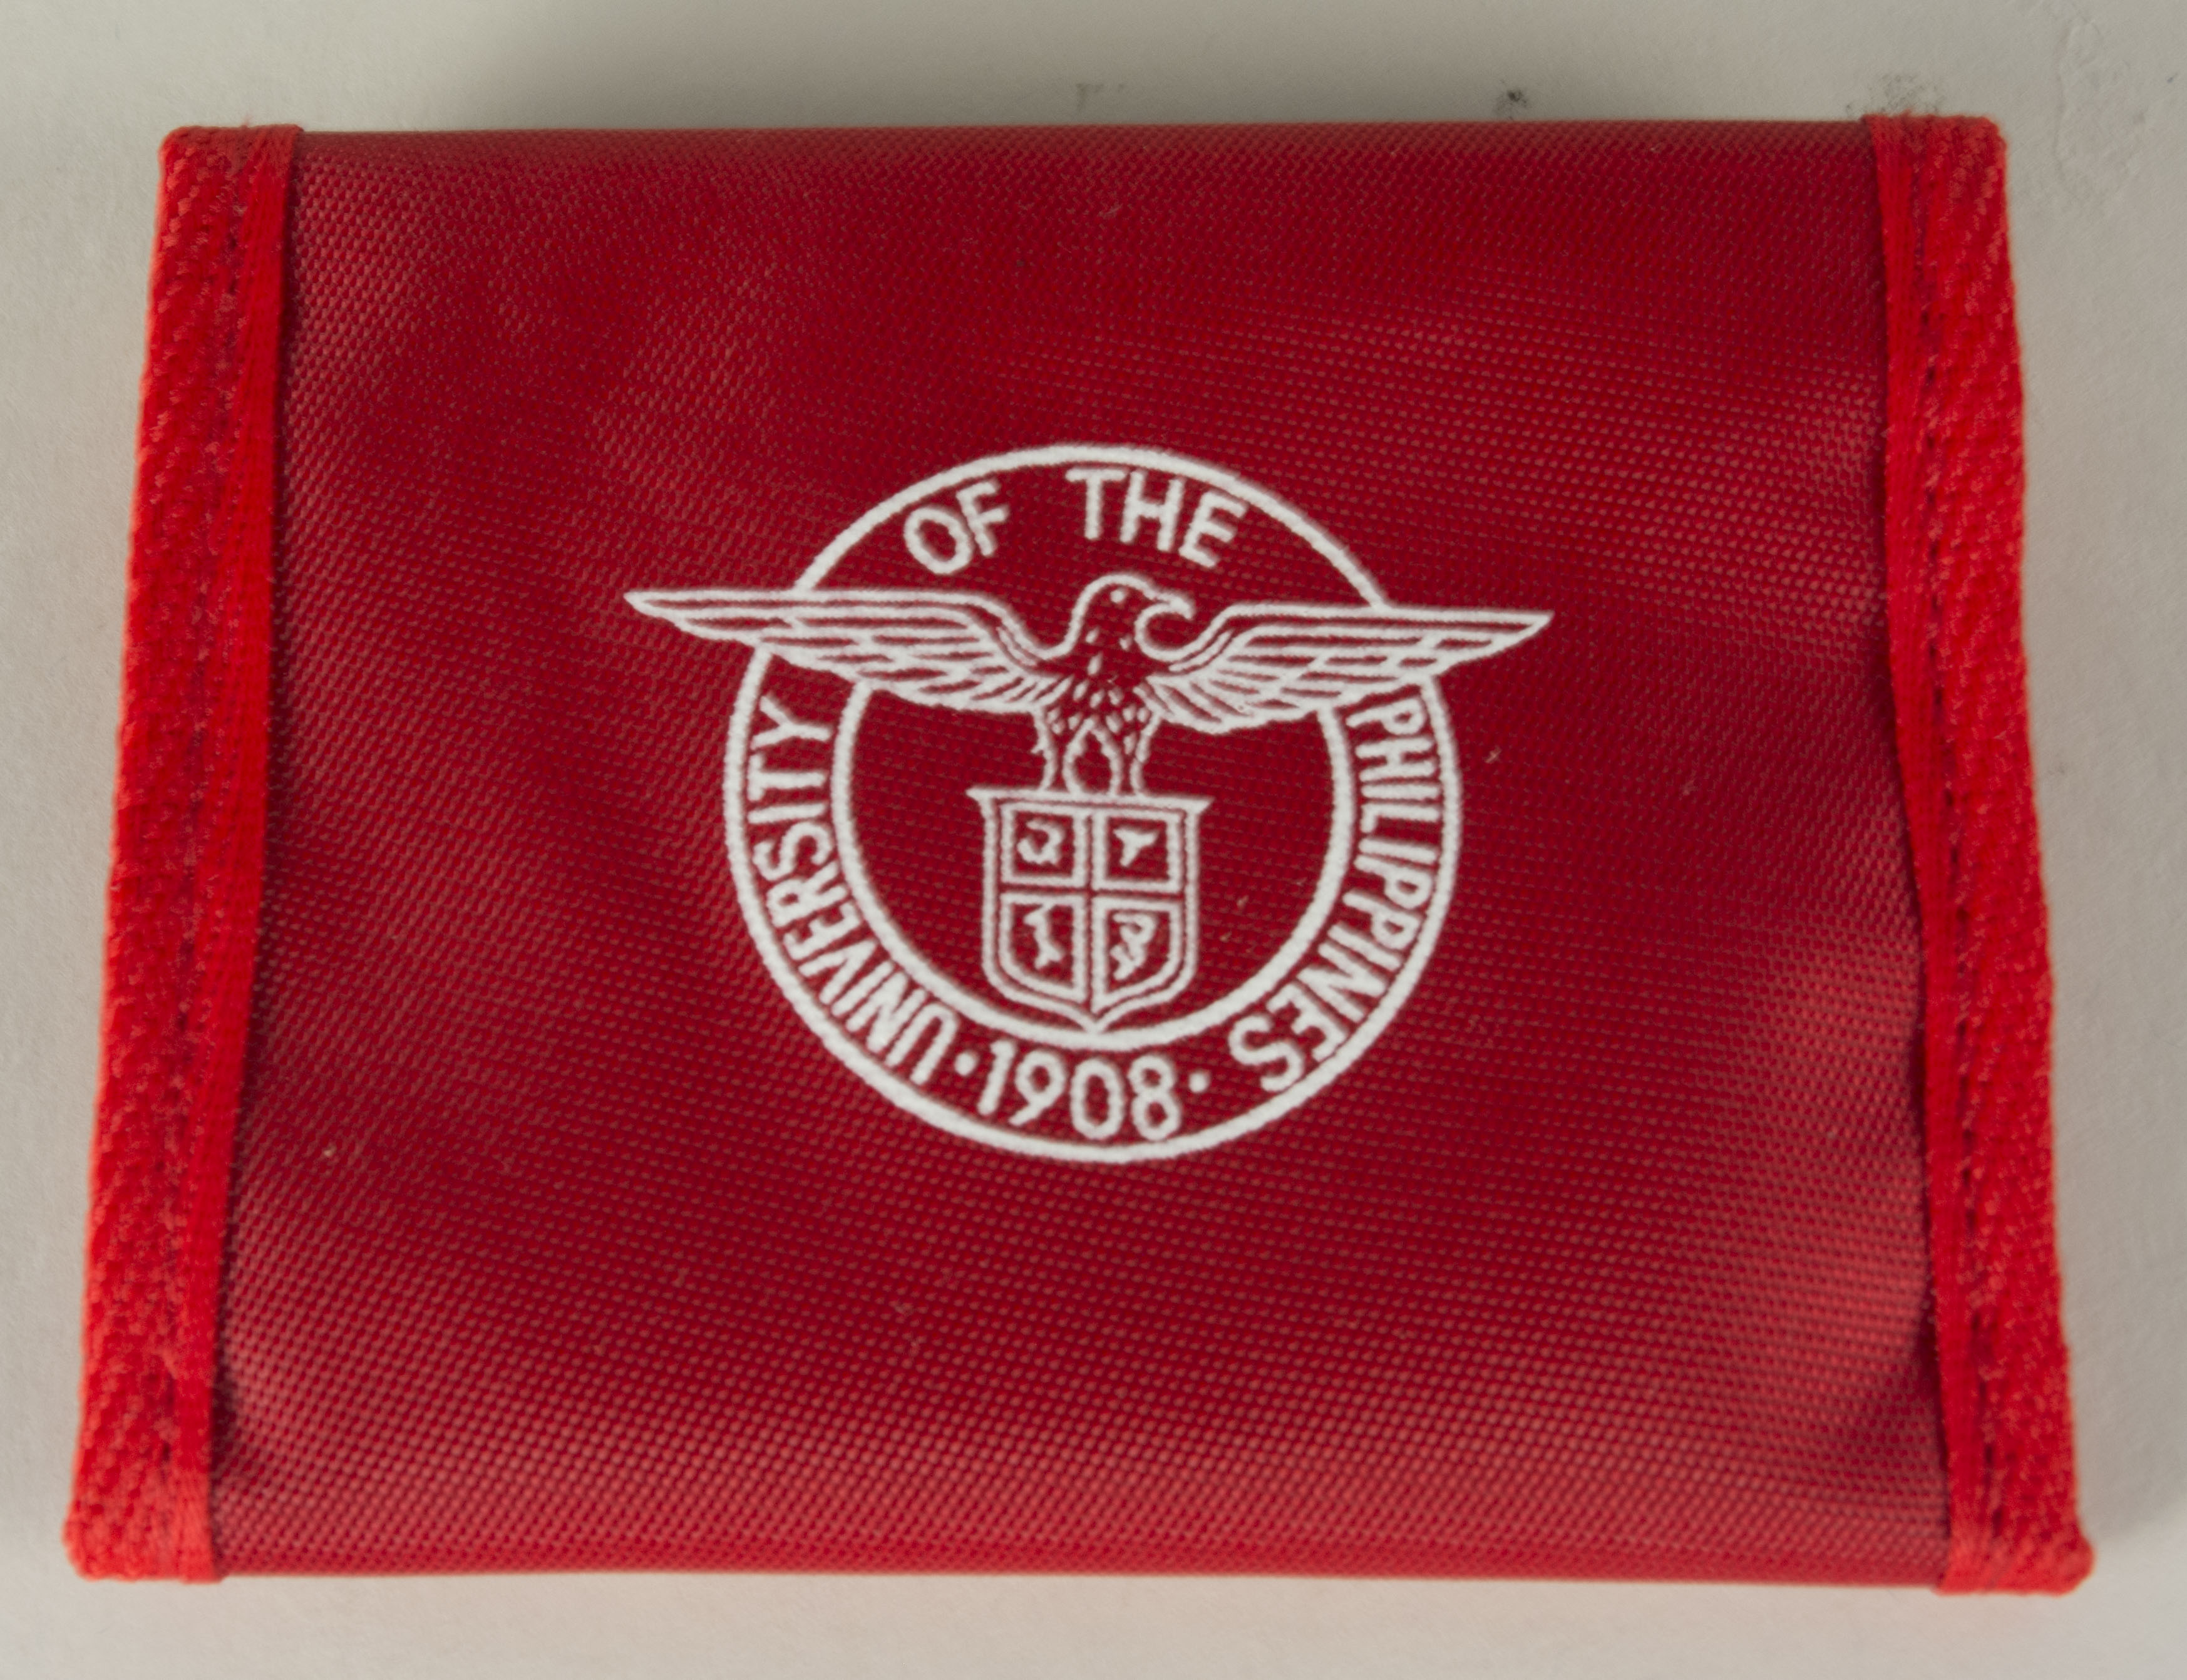 University of the Philippines wallet owned by SalazarSalazar said the objects were made in 2008 for the University of the Philippines centennial. They were gifts from a schoolmate, given to Salazar on a  visit to the Philippines. All writing on the objects is in English. Salazar said the university was a big part of his life.Between school and work, he was connected to the University for 11+ years. Salazar said he has fond memories and many close relationships from the University. Any views, findings, conclusions, or recommendations expressed in this story do not necessarily represent those of the National Endowment for the Humanities. (c) Field Museum of Natural History - CC BY-NC 4.0